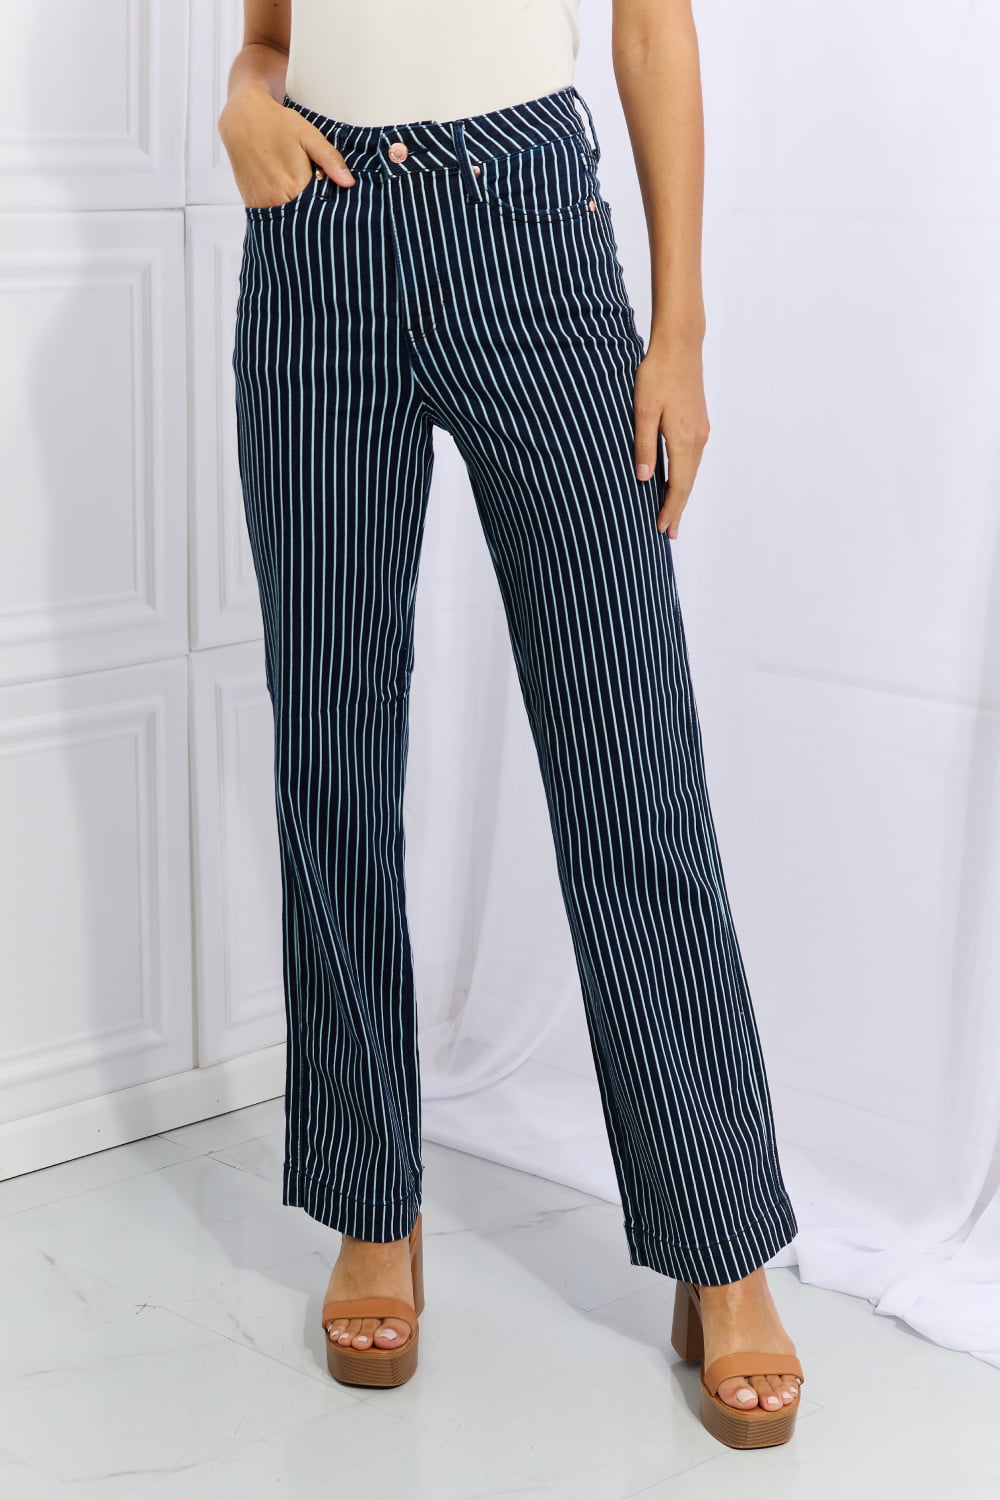 Judy Blue Cassidy Full Size High Waisted Tummy Control Striped Straight Jeans - nailedmoms